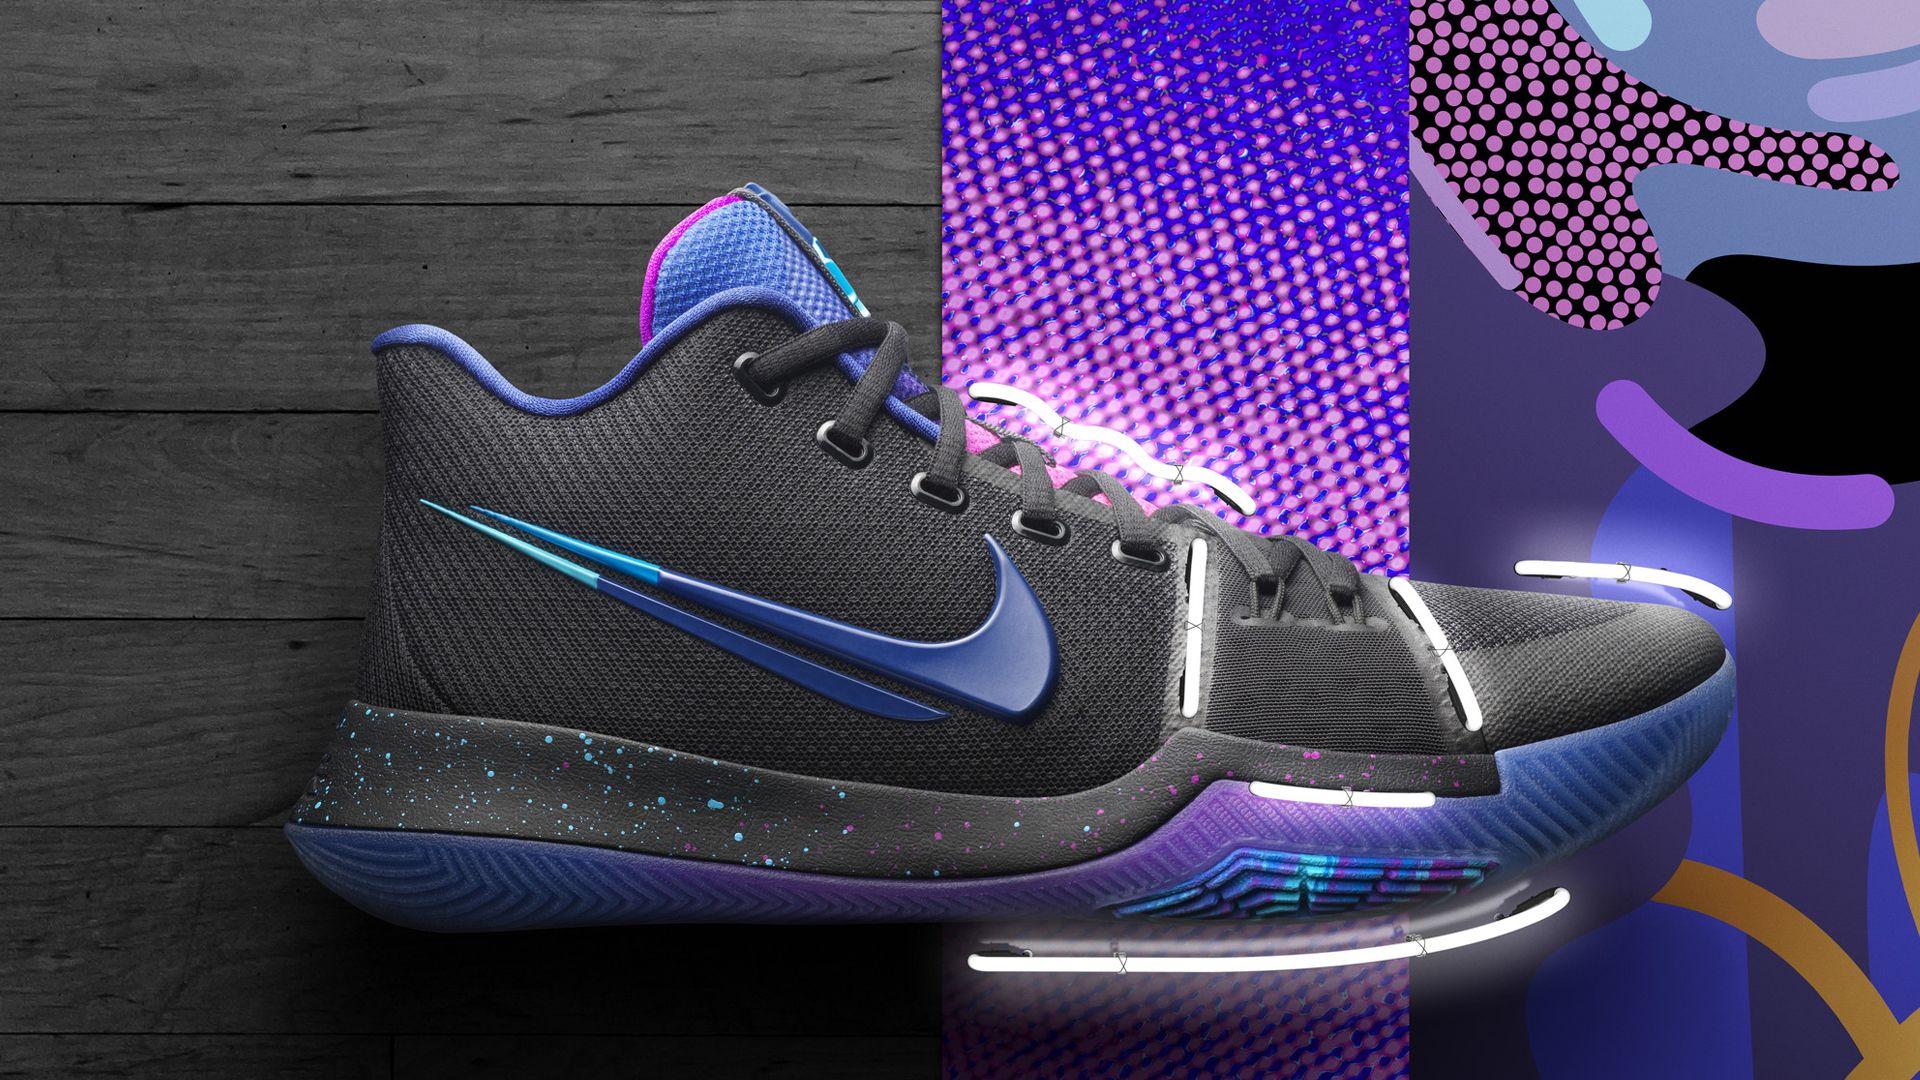 Nike Shoe Wallpaper with Nike Kyrie 3 Flip the Switch for Basketball